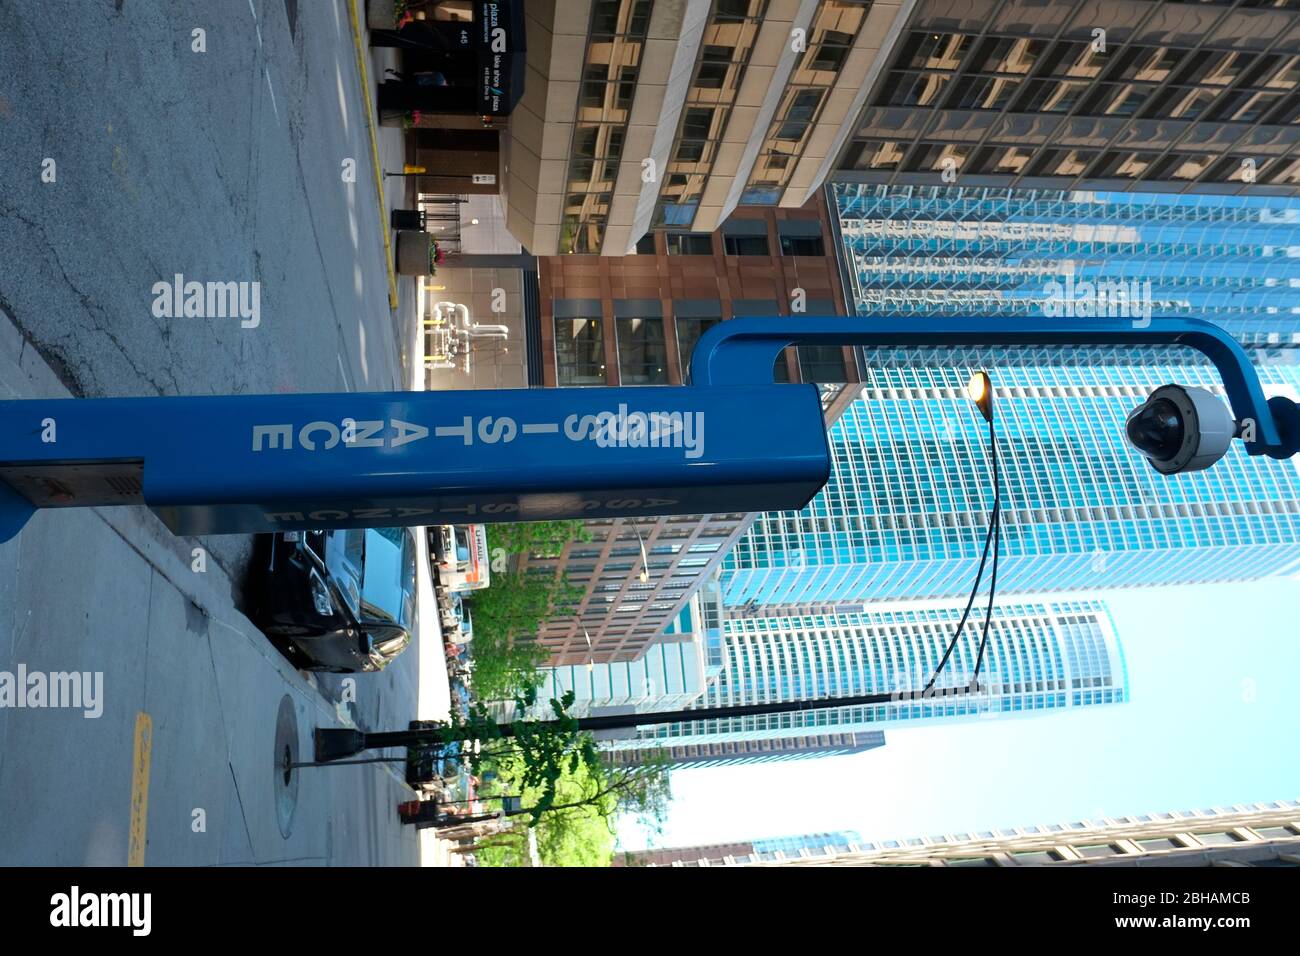 Emergency communication device with camera. Downtown Chicago, Ill. Stock Photo